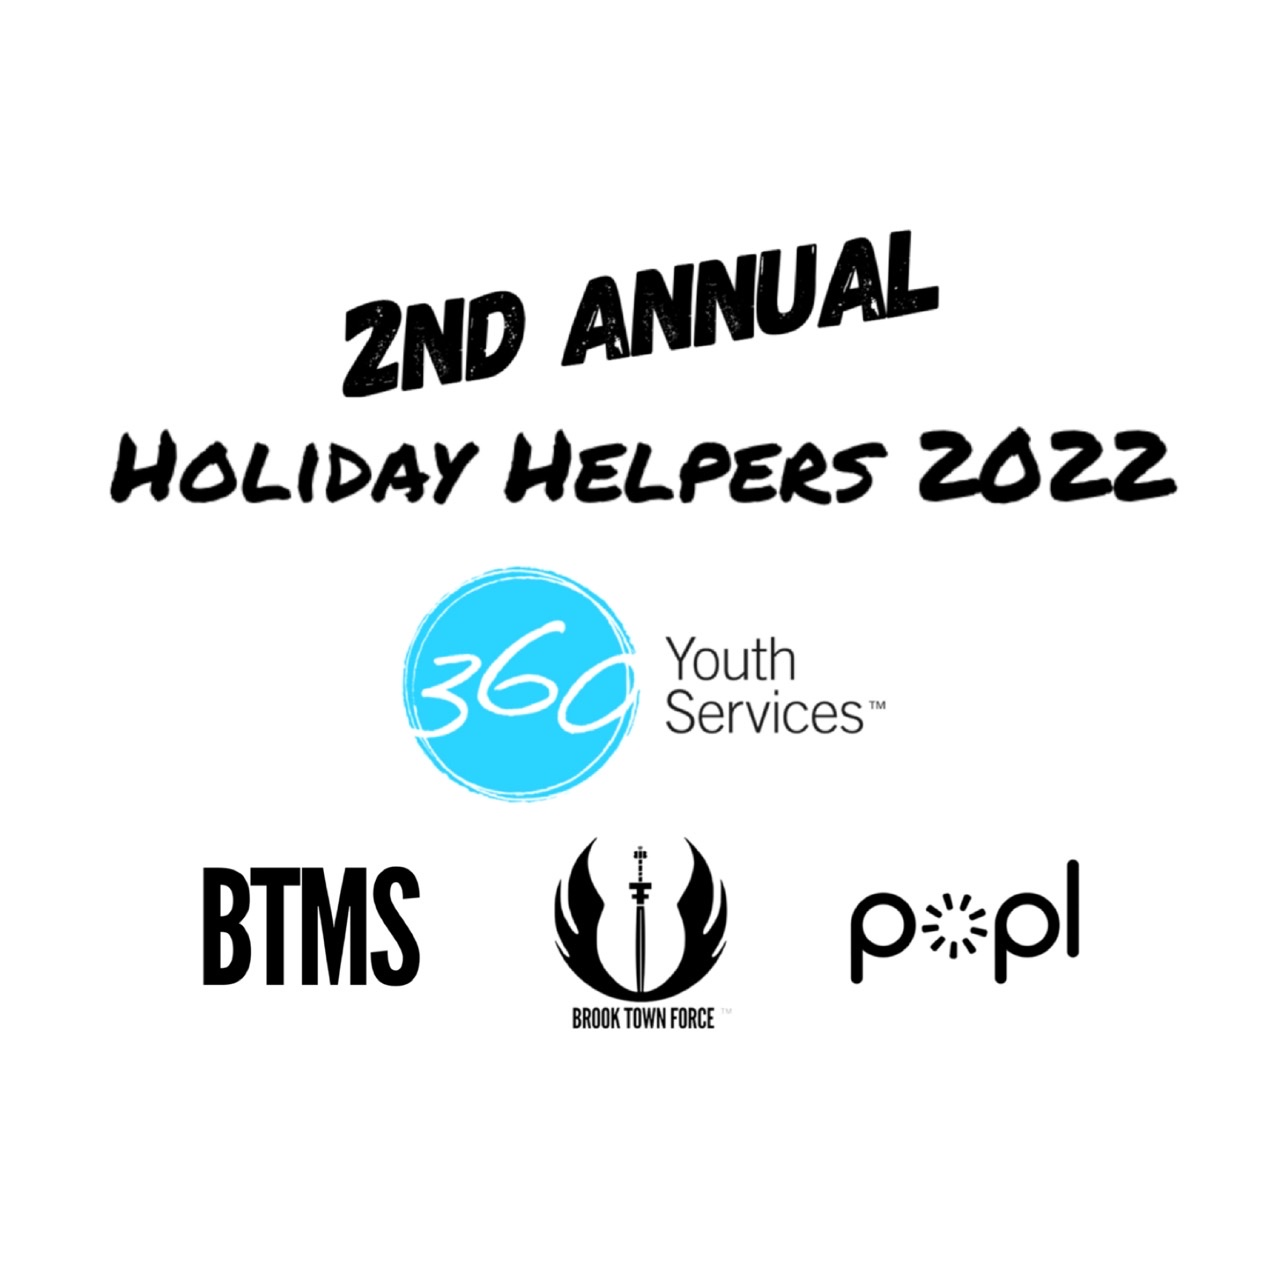 2nd Annual Holiday Helpers 2022 Helping Homeless Kids During Holidays by giving care packages, bedding sets, gift cards & more! on Dec 23, 19:00@Bar Louie - Buy tickets and Get information on BTMS LLC 